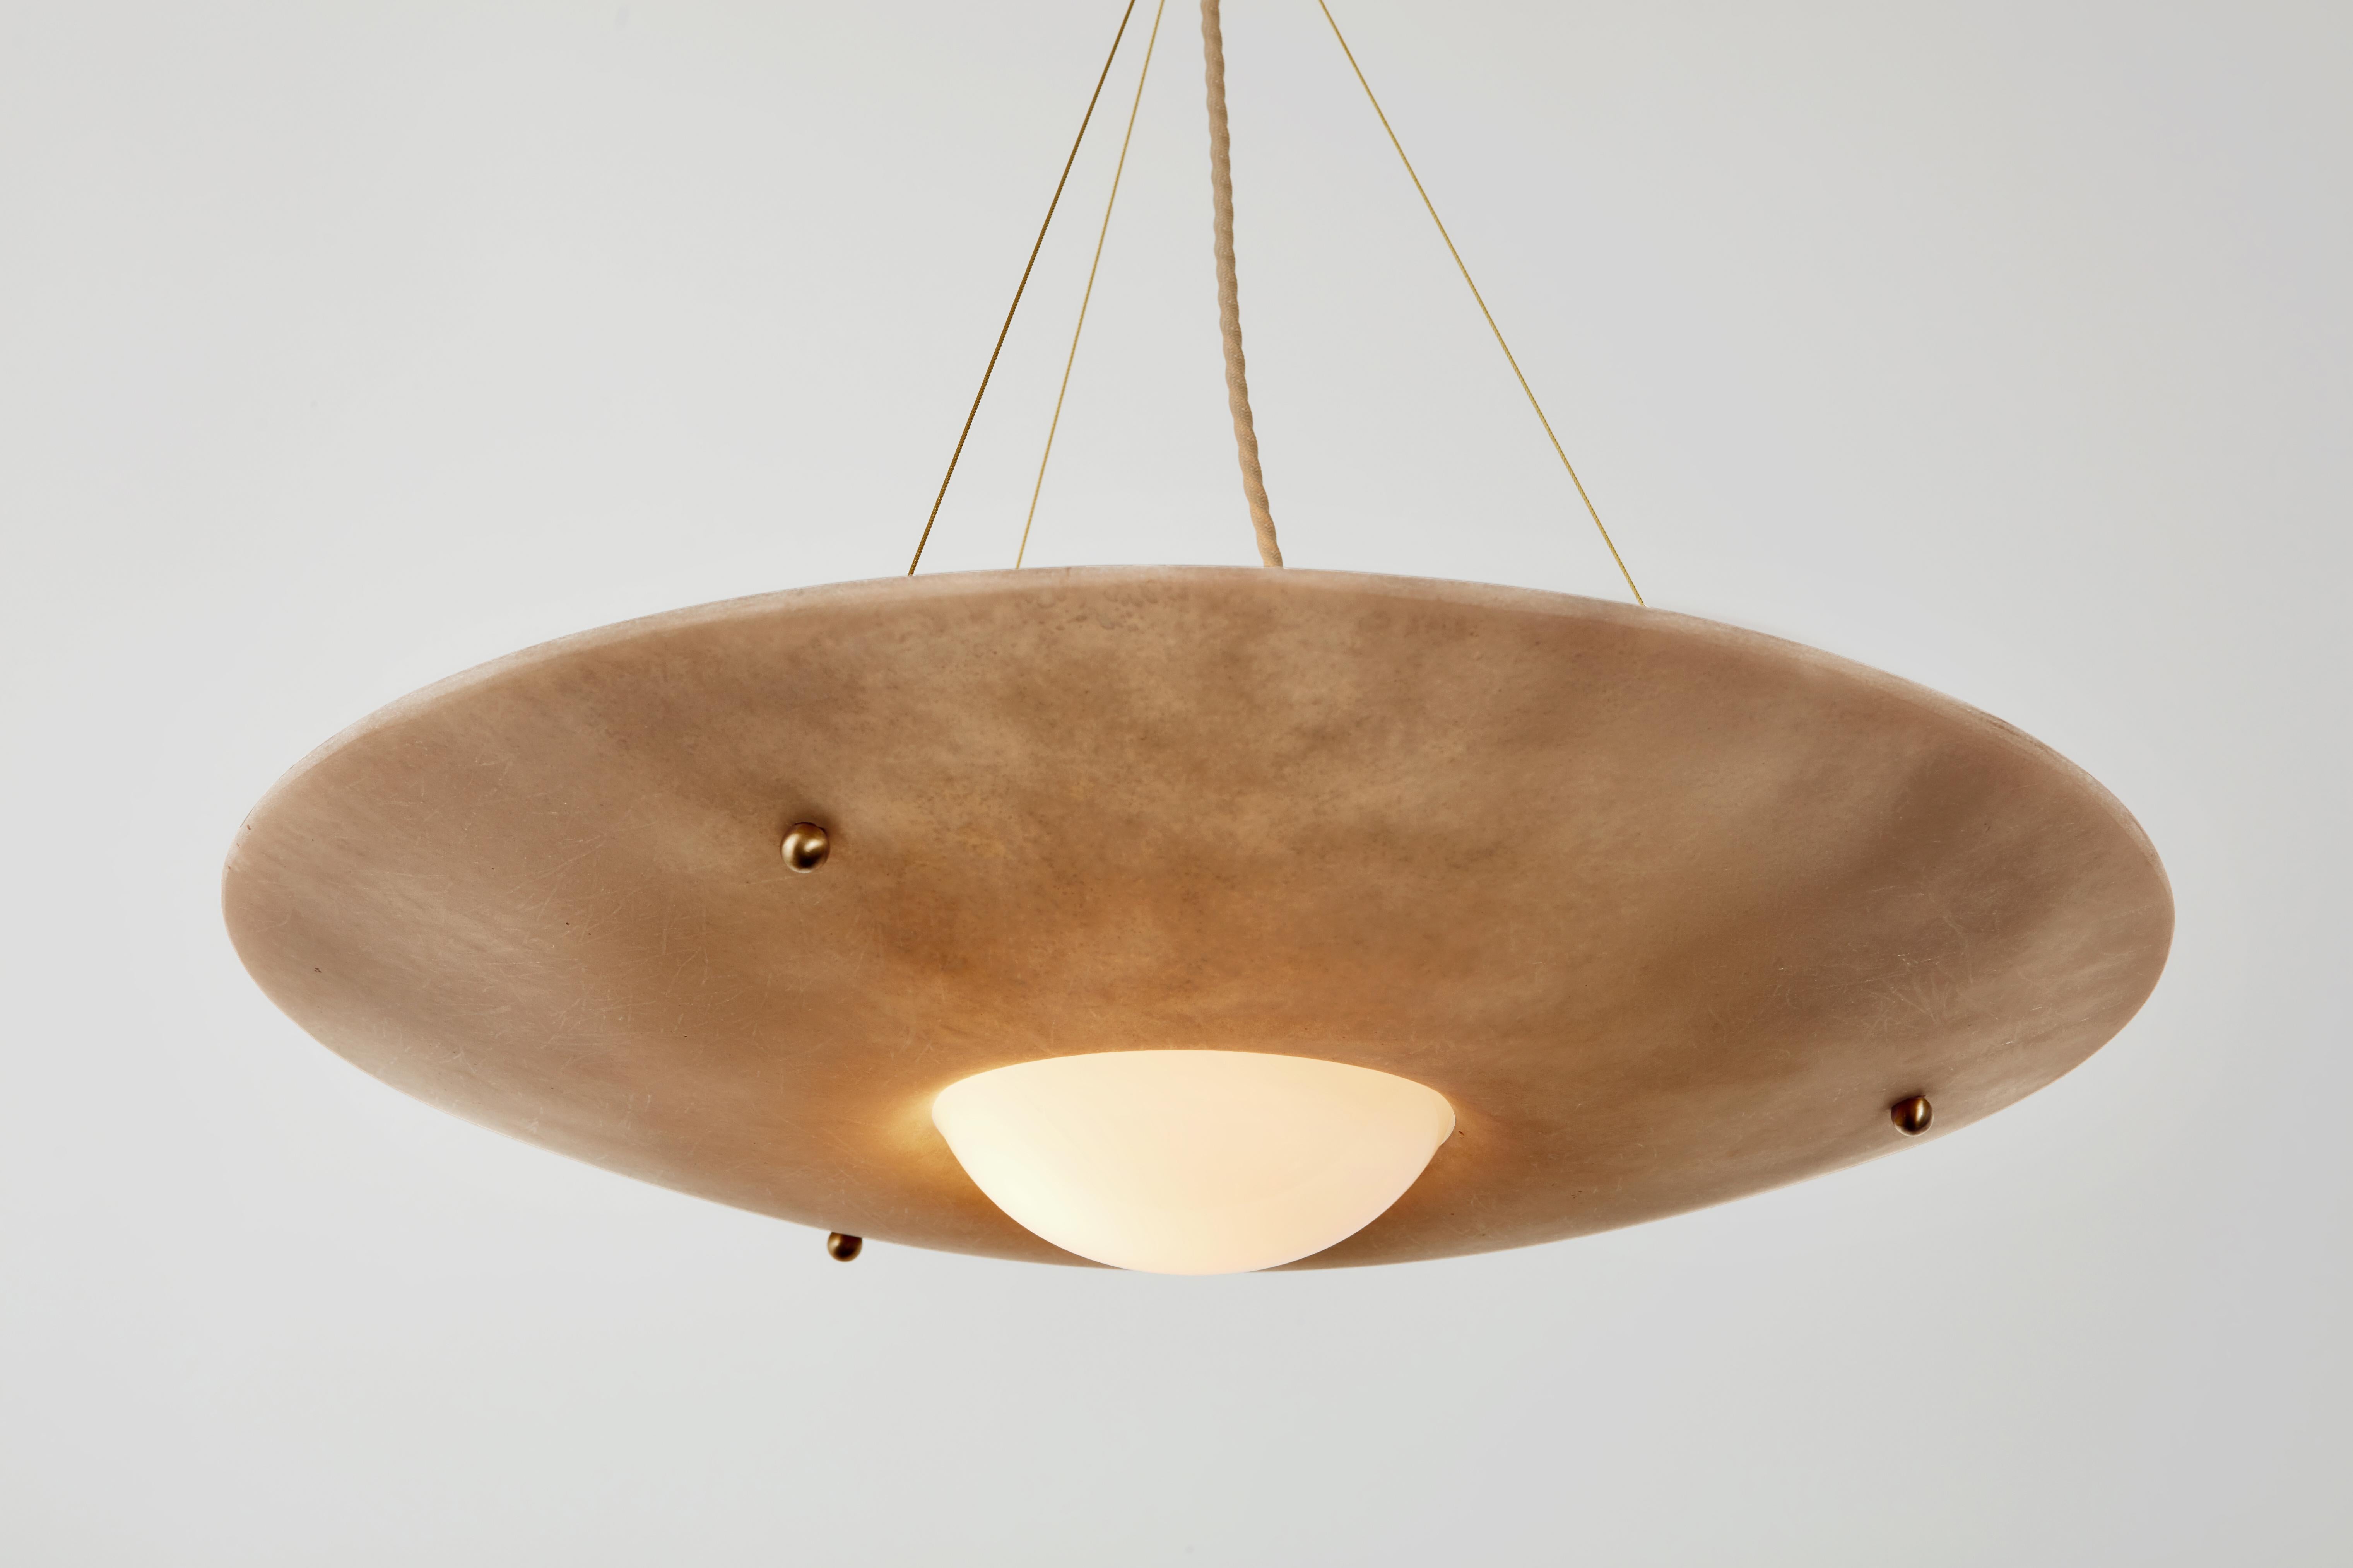 The Fiber series was inspired by nautical materials, textures and connections. The elemental construction uses raw fiberglass discs, illuminated by open blown glass orbs to create airy architectural forms. Each component simply rests in another,